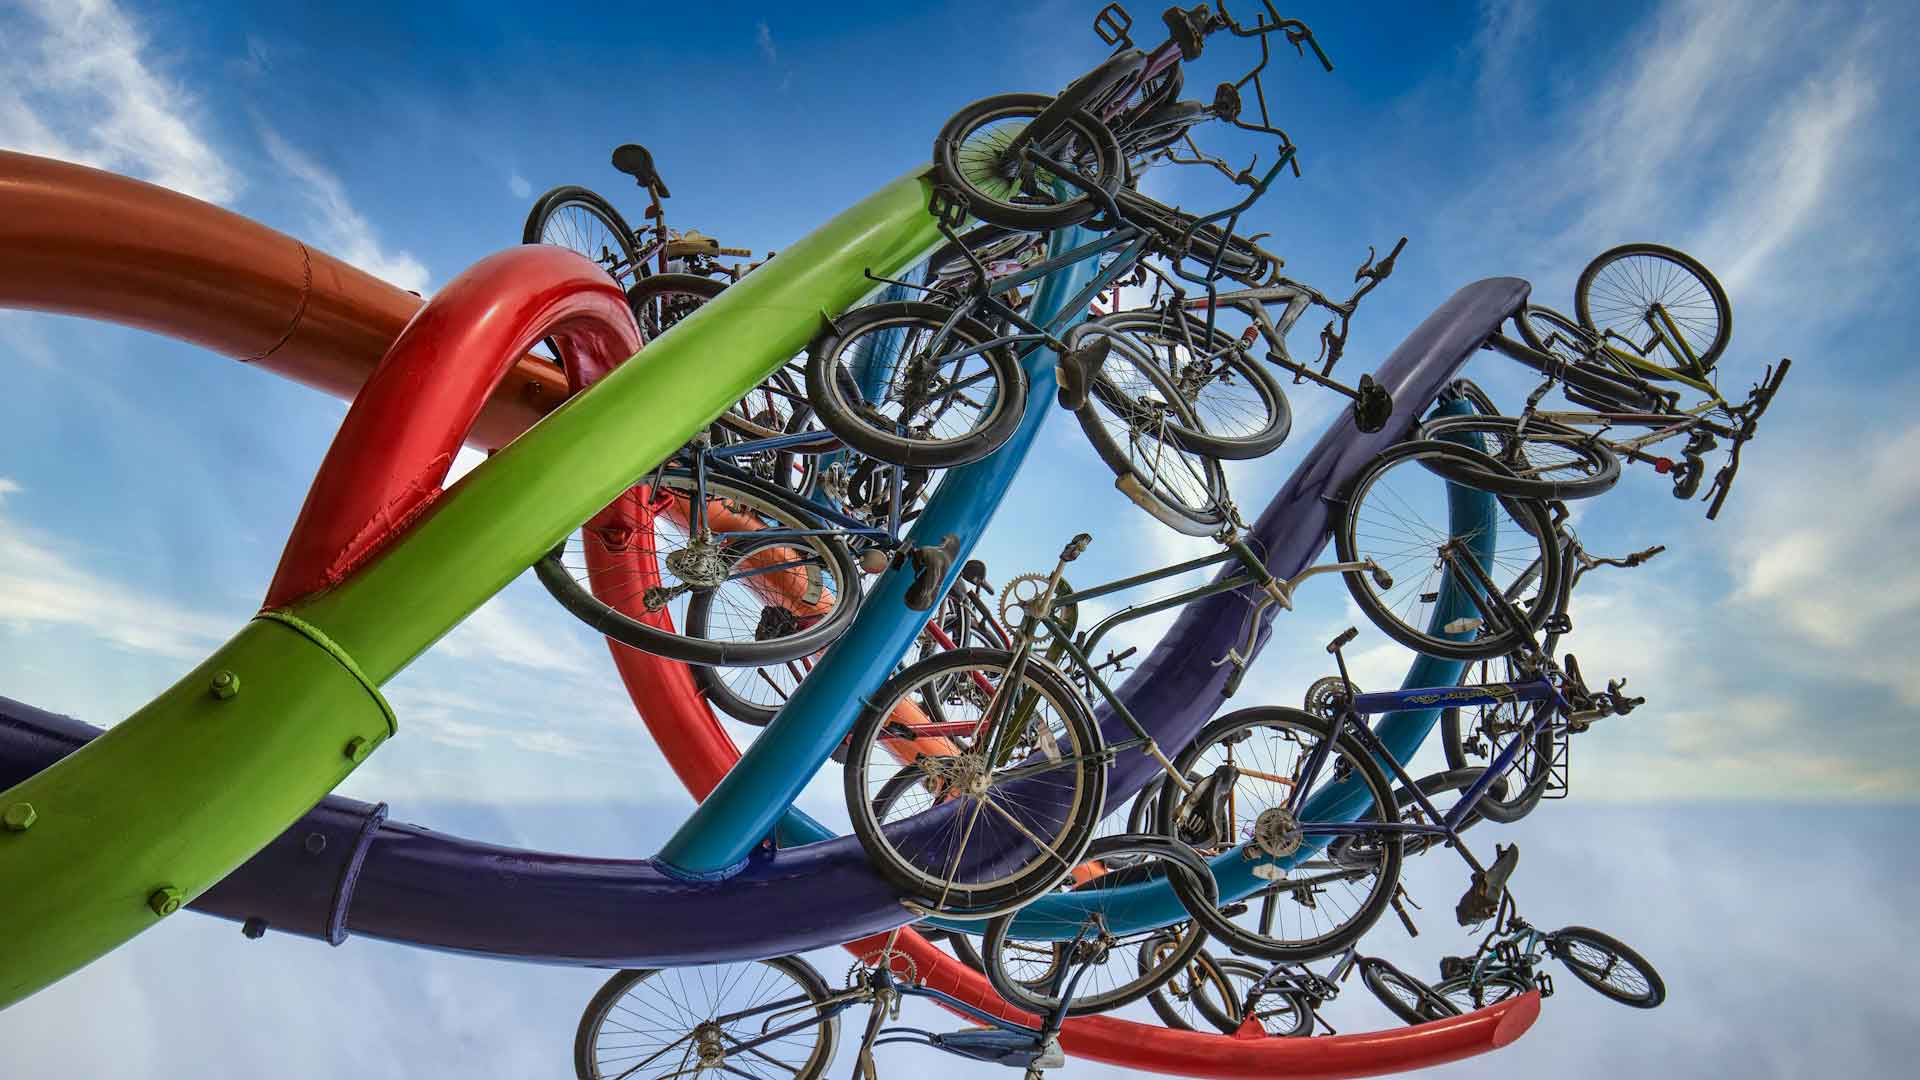 A collection of bikes showing a growth mindset psychology.